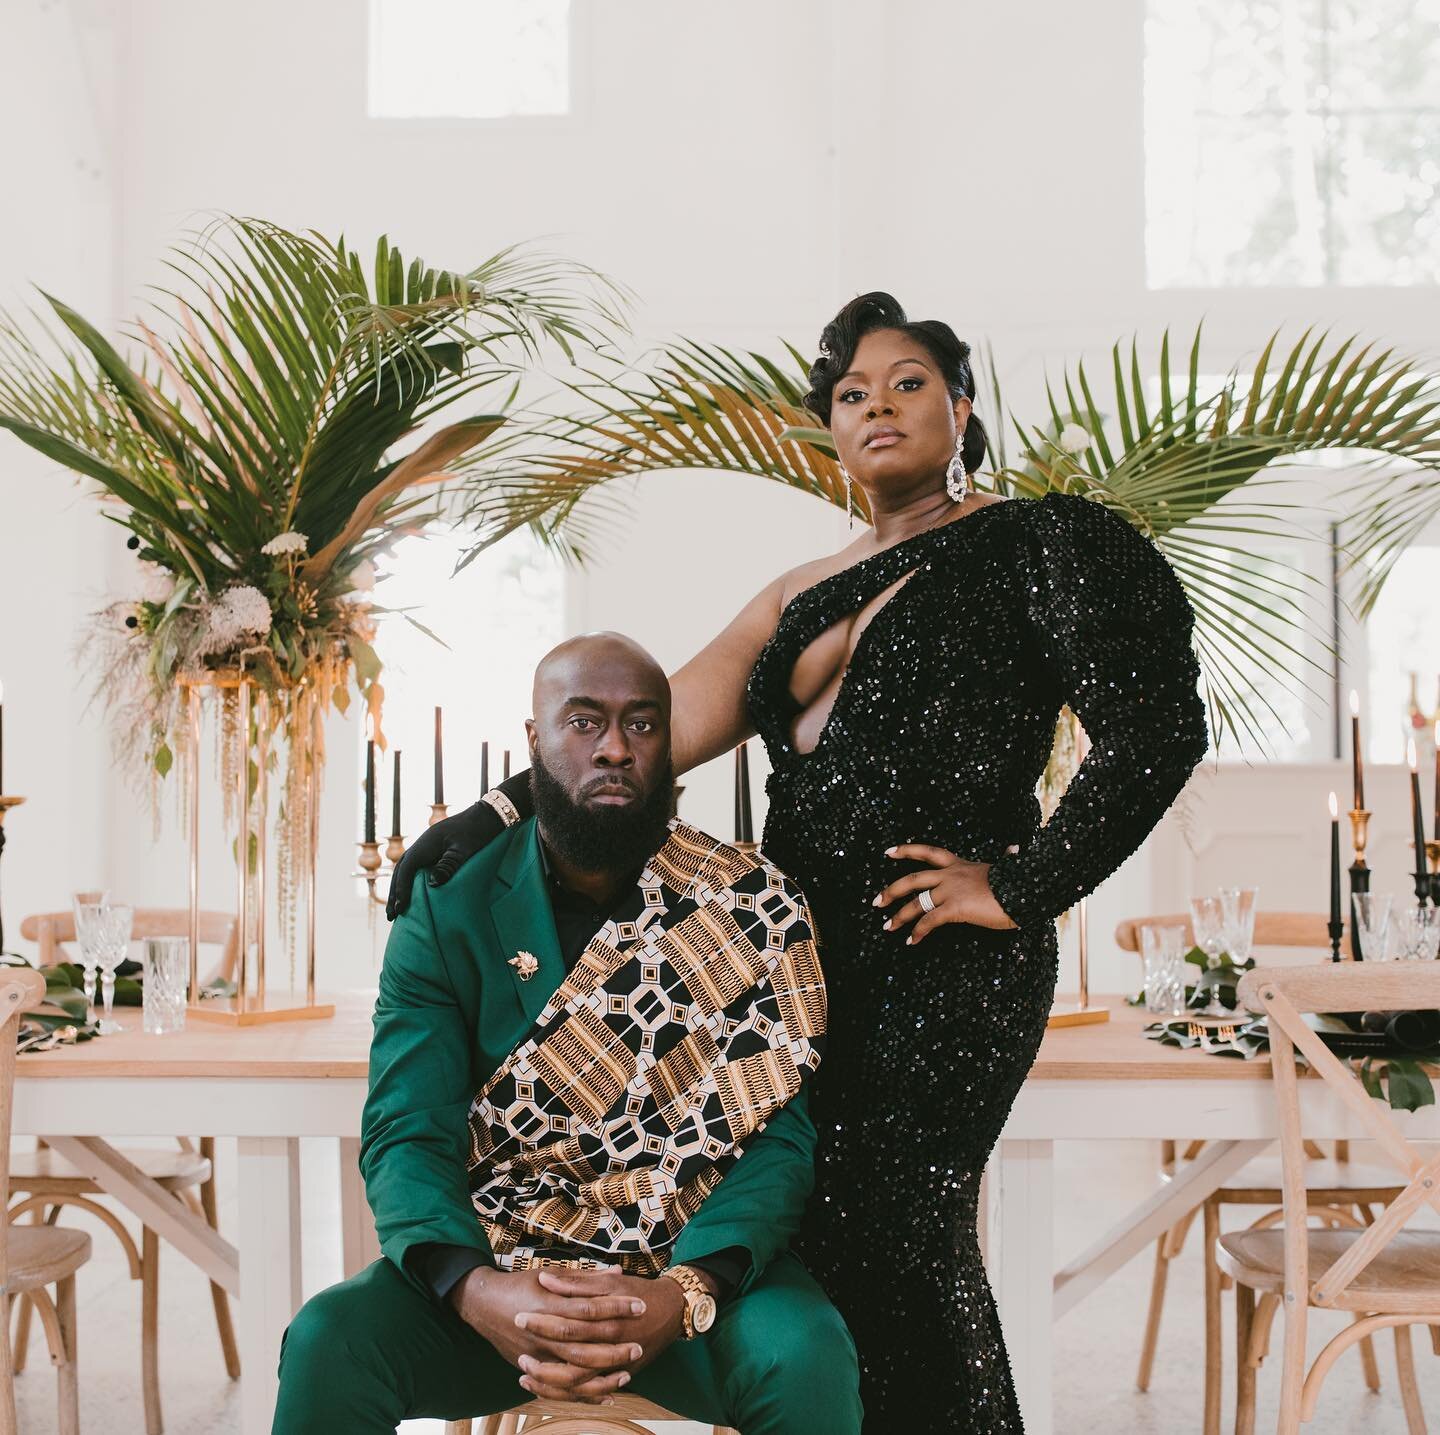 Opulence. Royalty. Regal. Noble. Dignified. Grand. Majestic. Luxury. Sophistication. 

When creating the Mood Board for this Styled Shoot these were the words that guided me and our team. I wanted every detail to speaks to these words. Here is a #sne